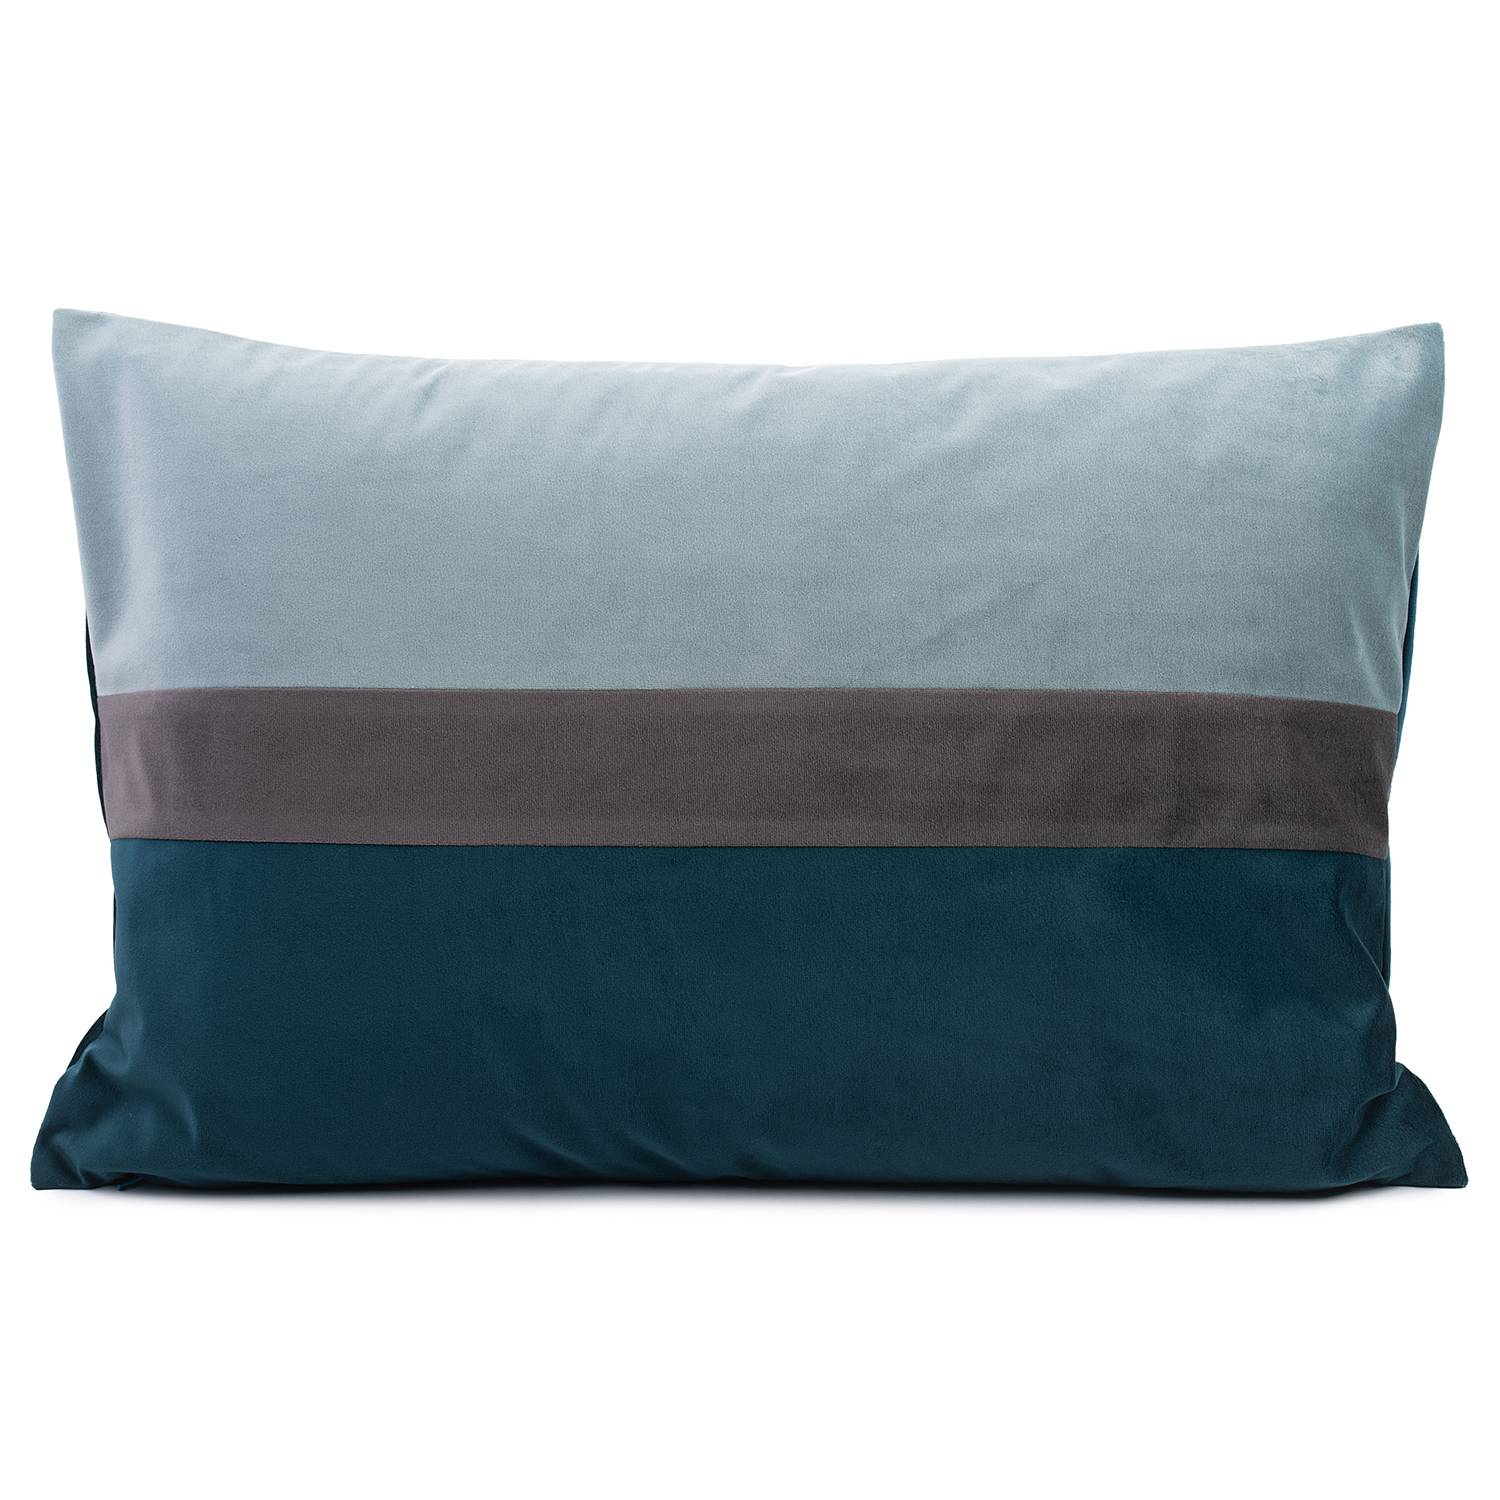 Image of Housse de coussin Pino 000000001000243538